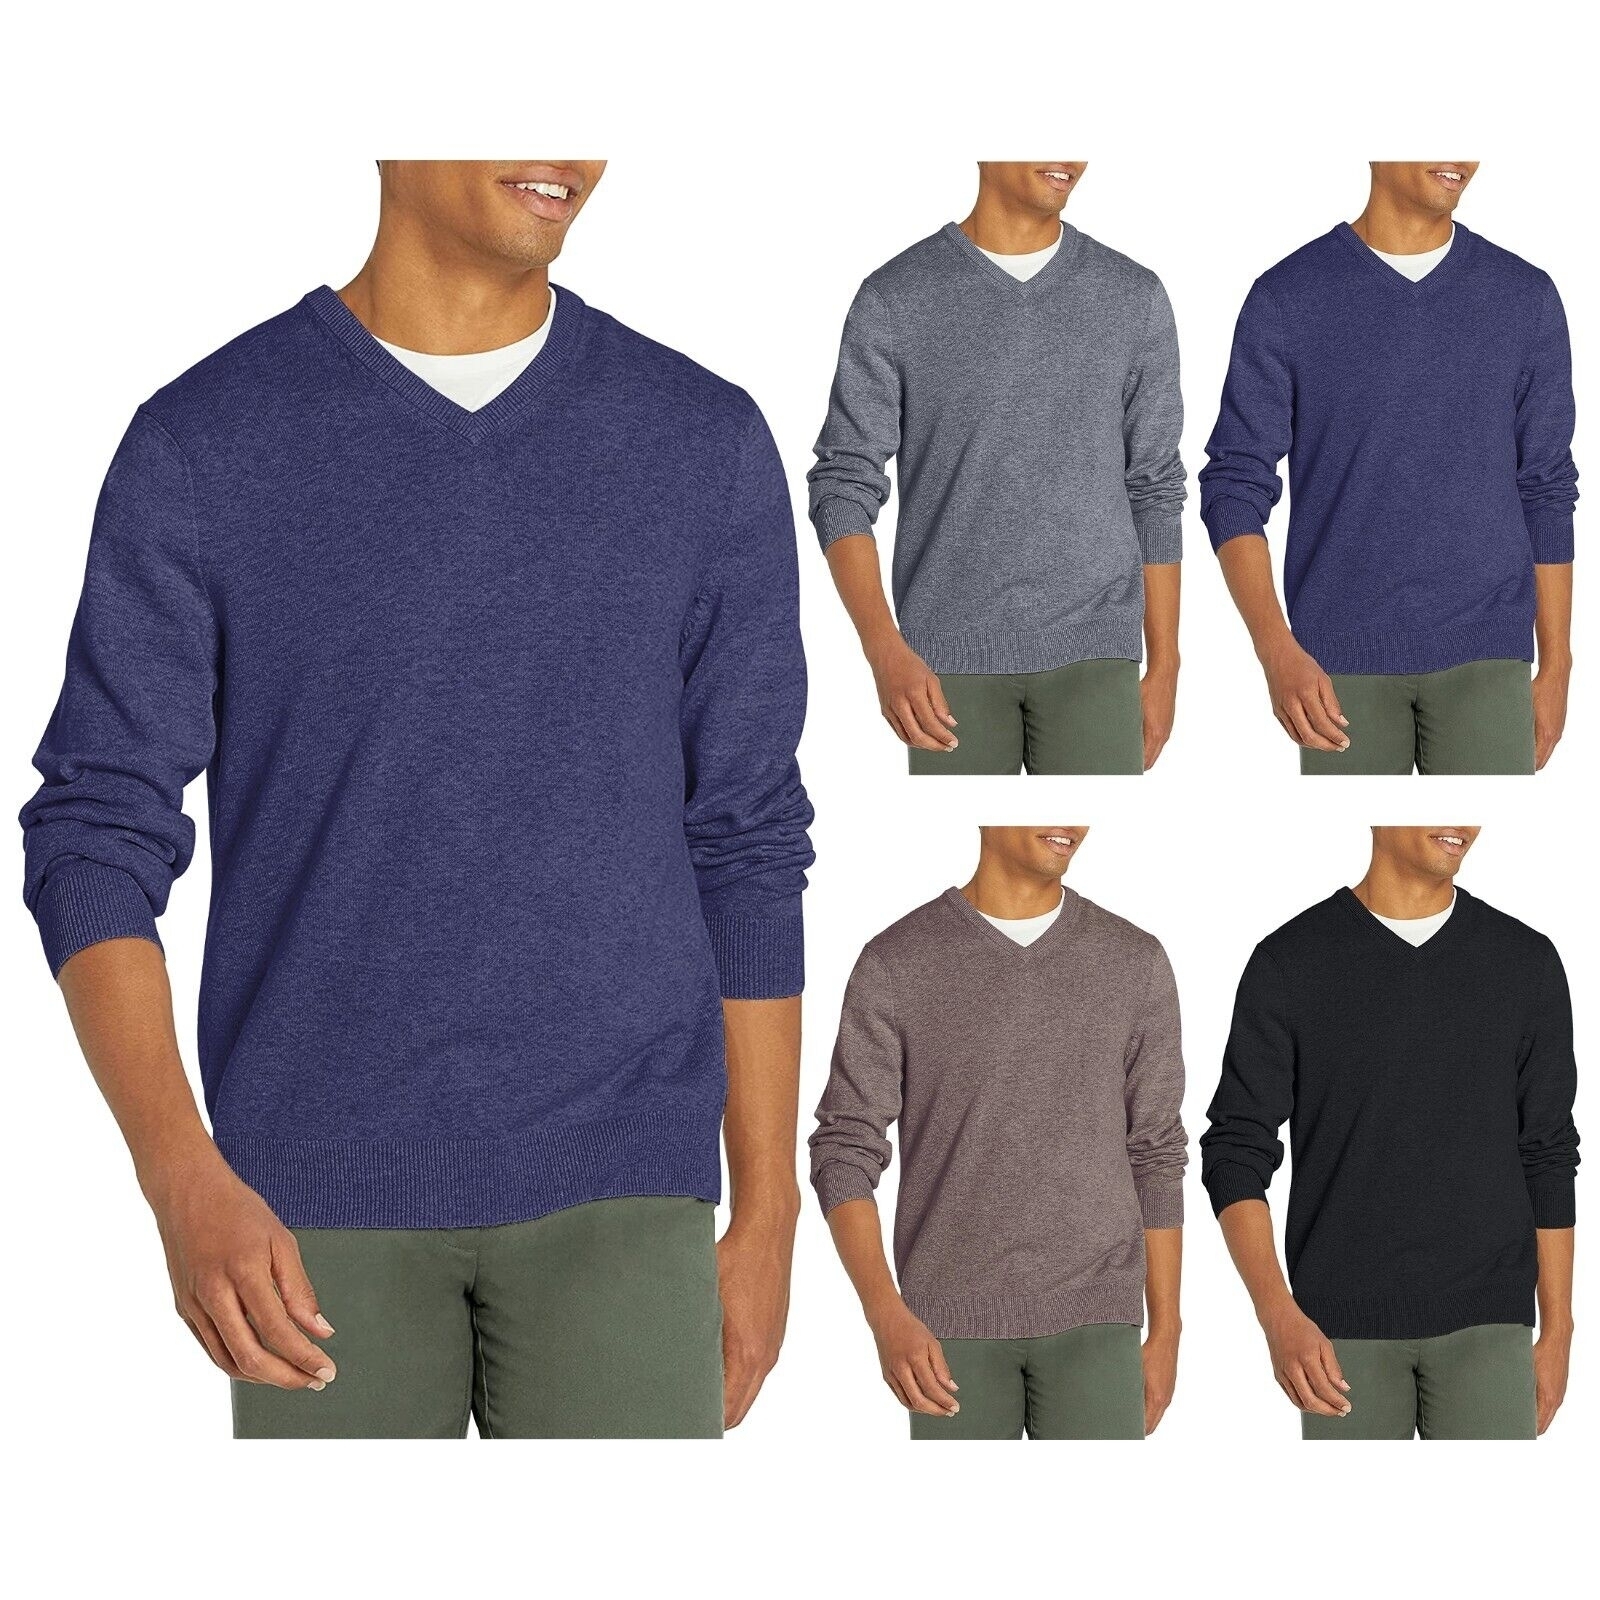 Multi-Pack Mens Cozy Comfy Ultra Soft Slim Fit Warm Knit Pullover V-Neck Sweater - 1, X-Large